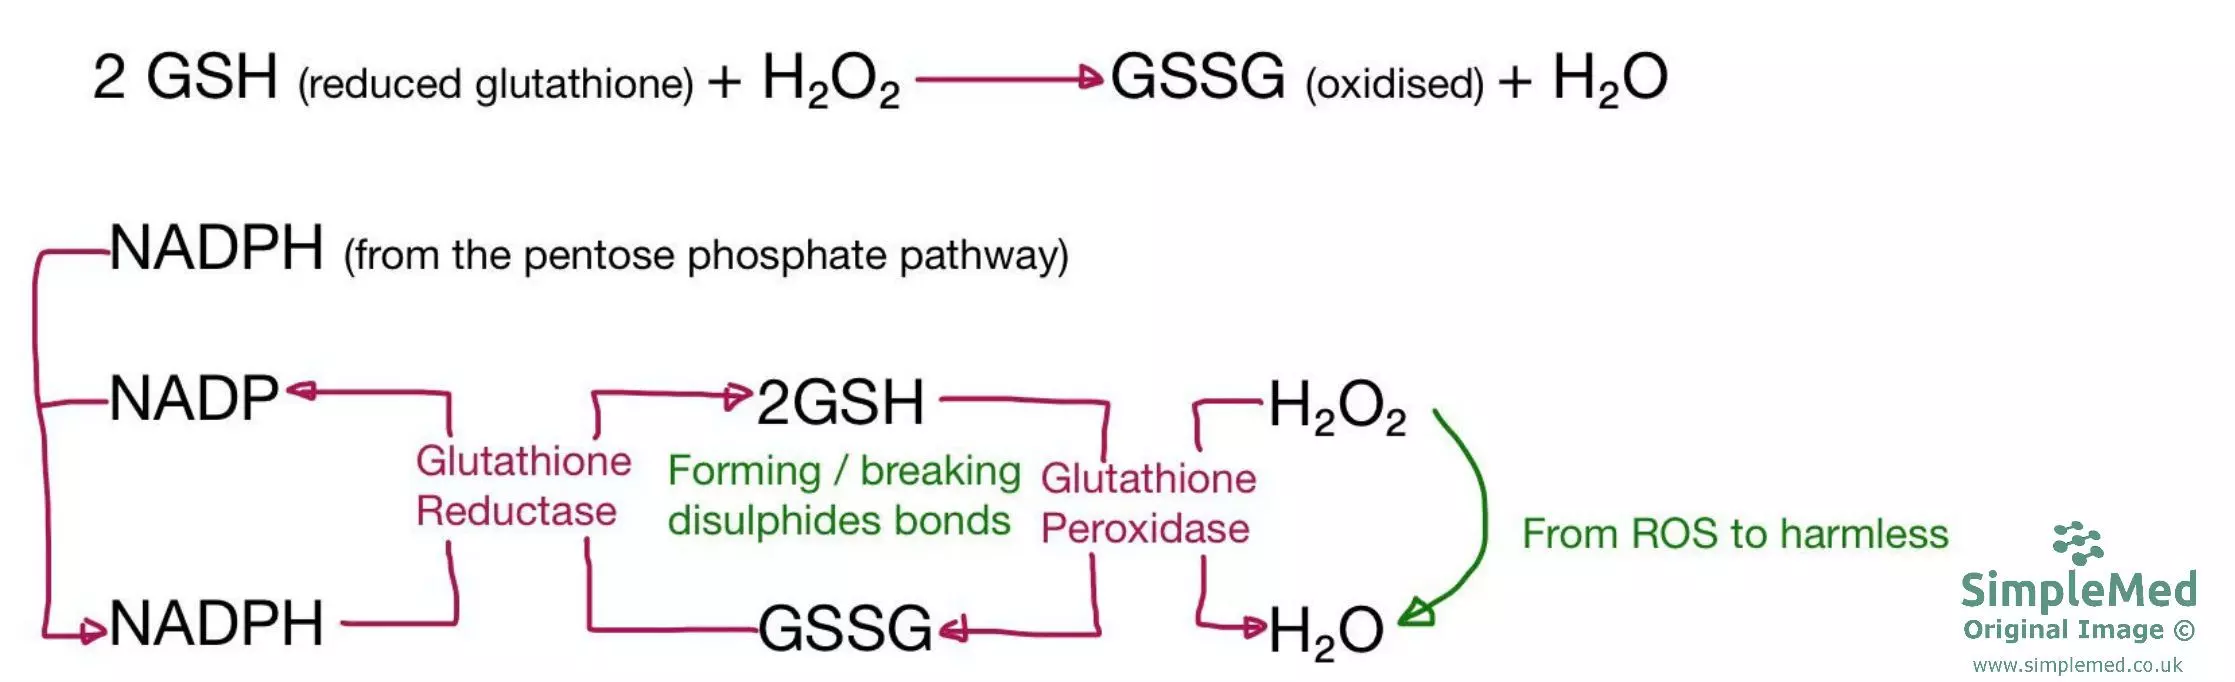 Glutathione Pathway Diagram SimpleMed